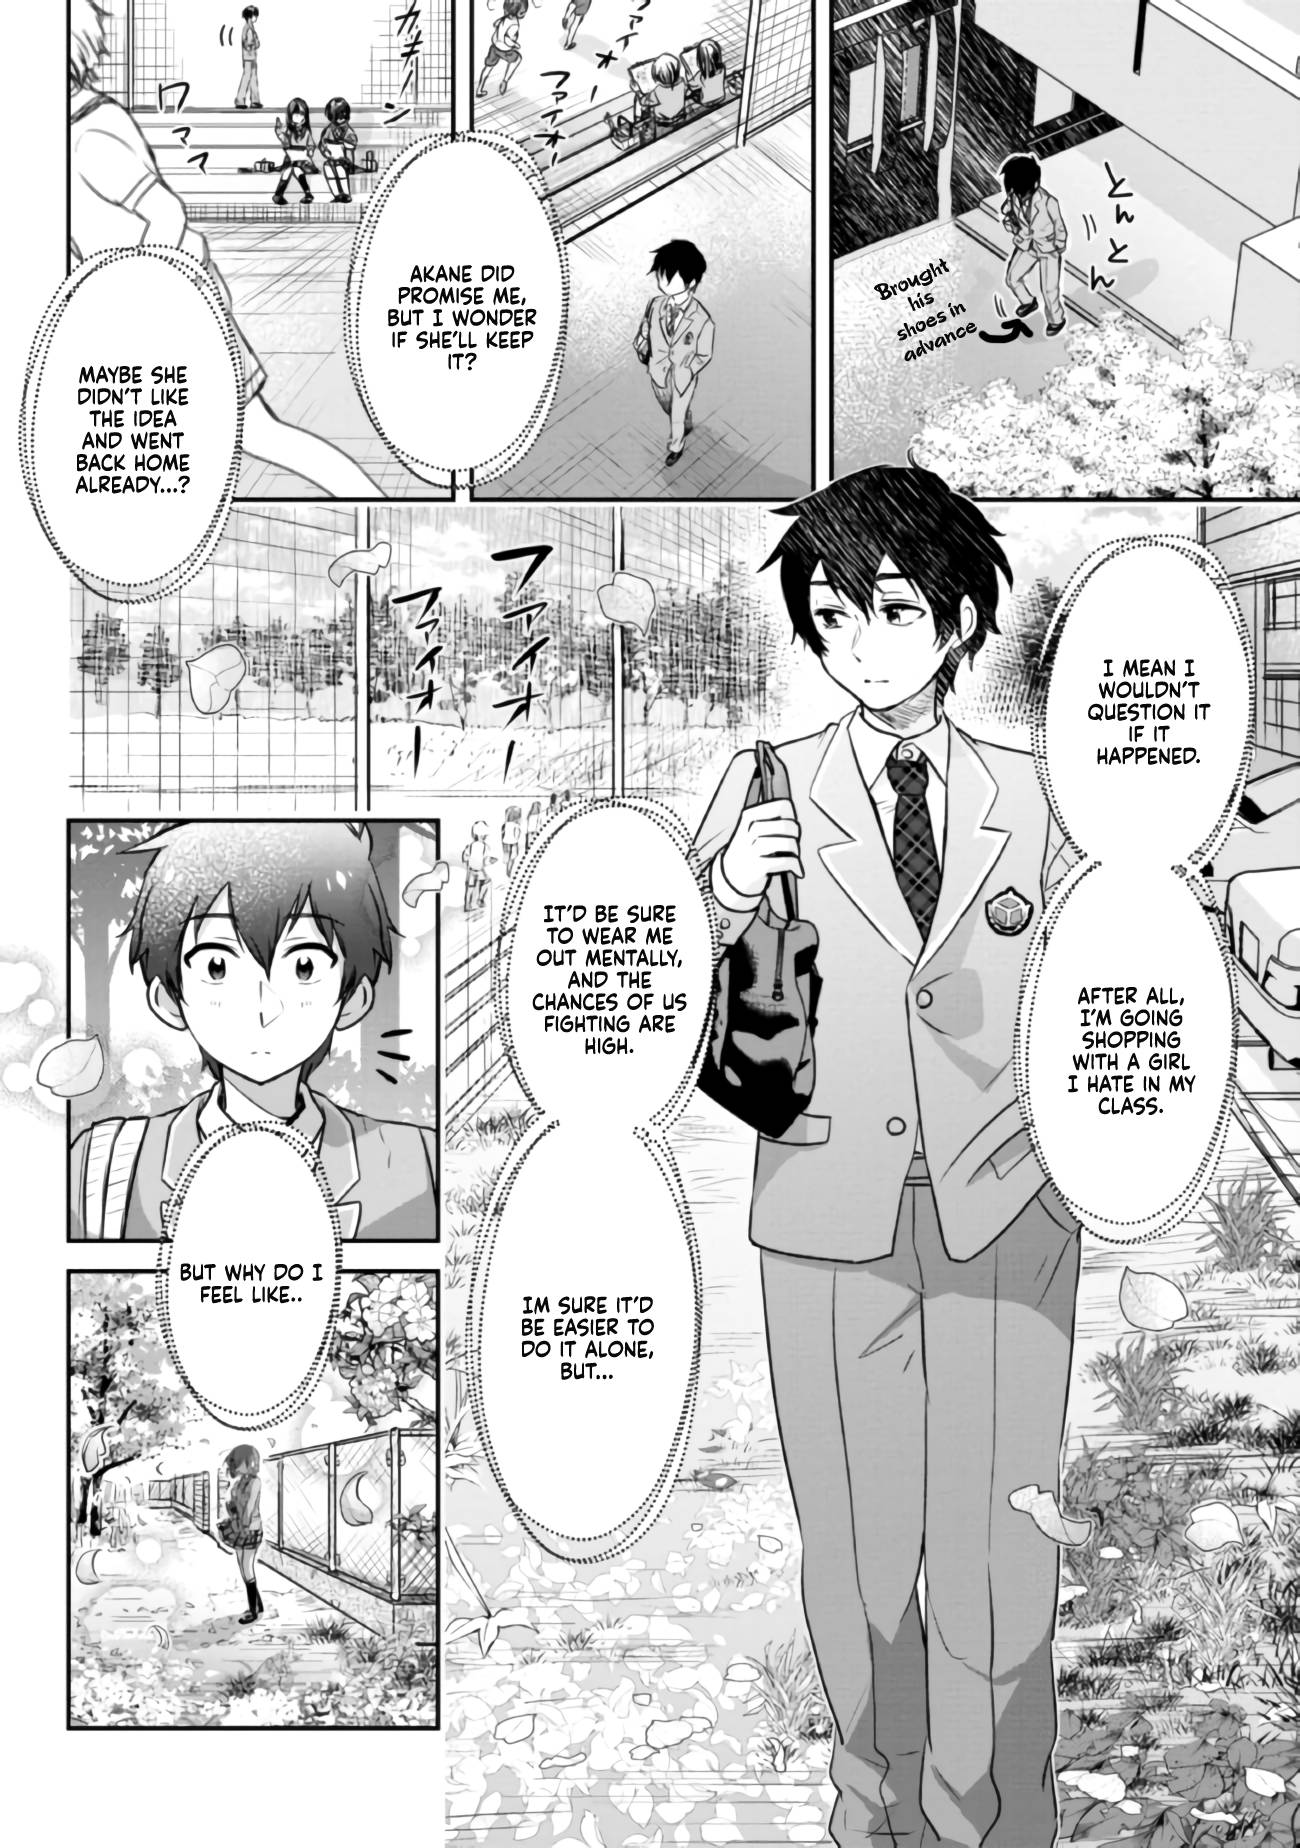 I’m getting married to a girl I hate in my class - chapter 7.5 - #3